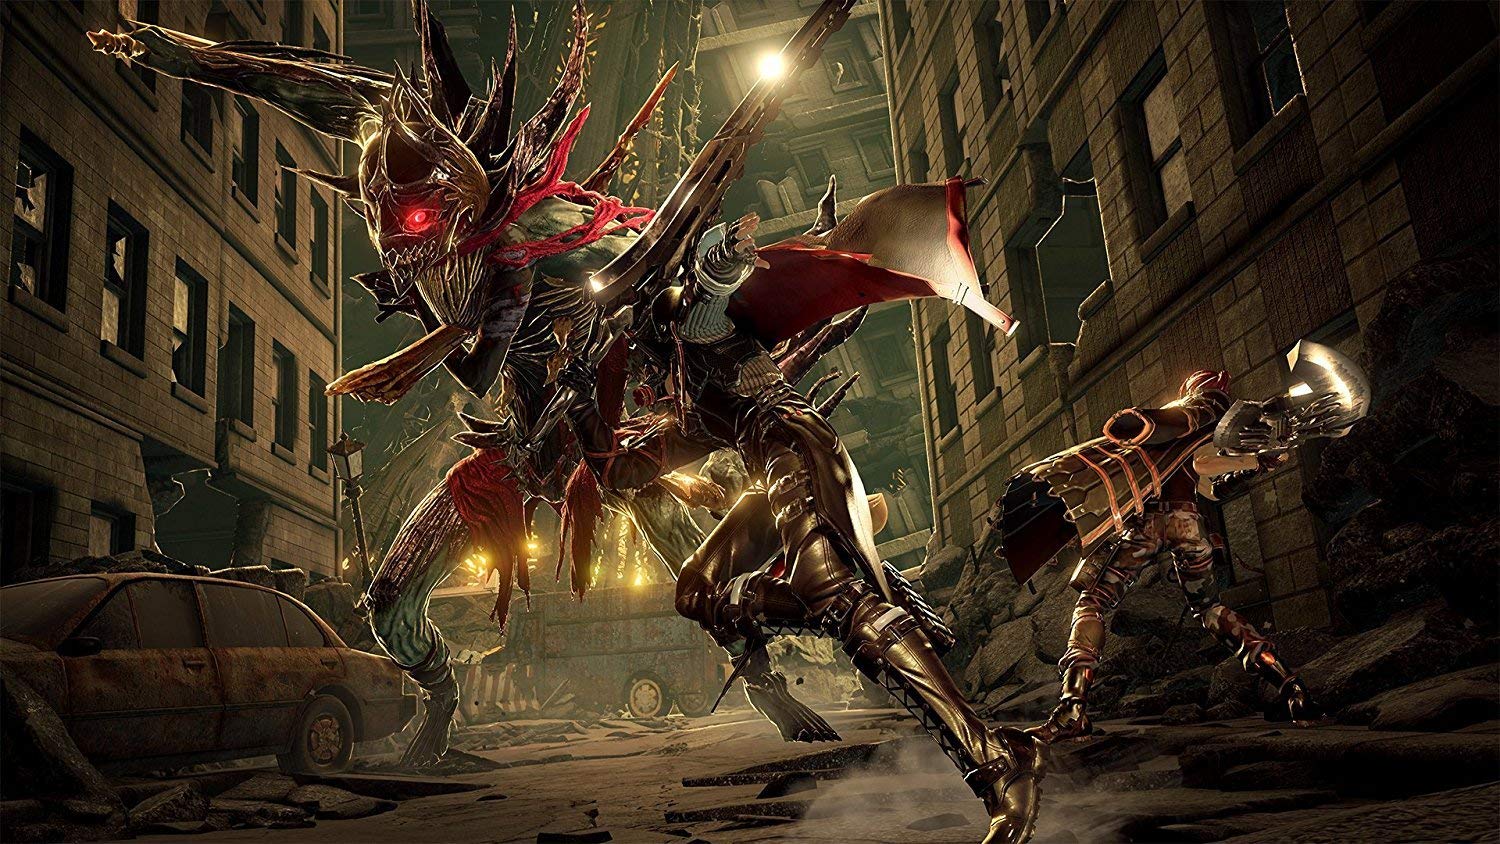 Code Vein (Bloodthirst Edition) (Limited Edition) - (PS4) PlayStation 4 (Japanese Import) Video Games Bandai Namco   